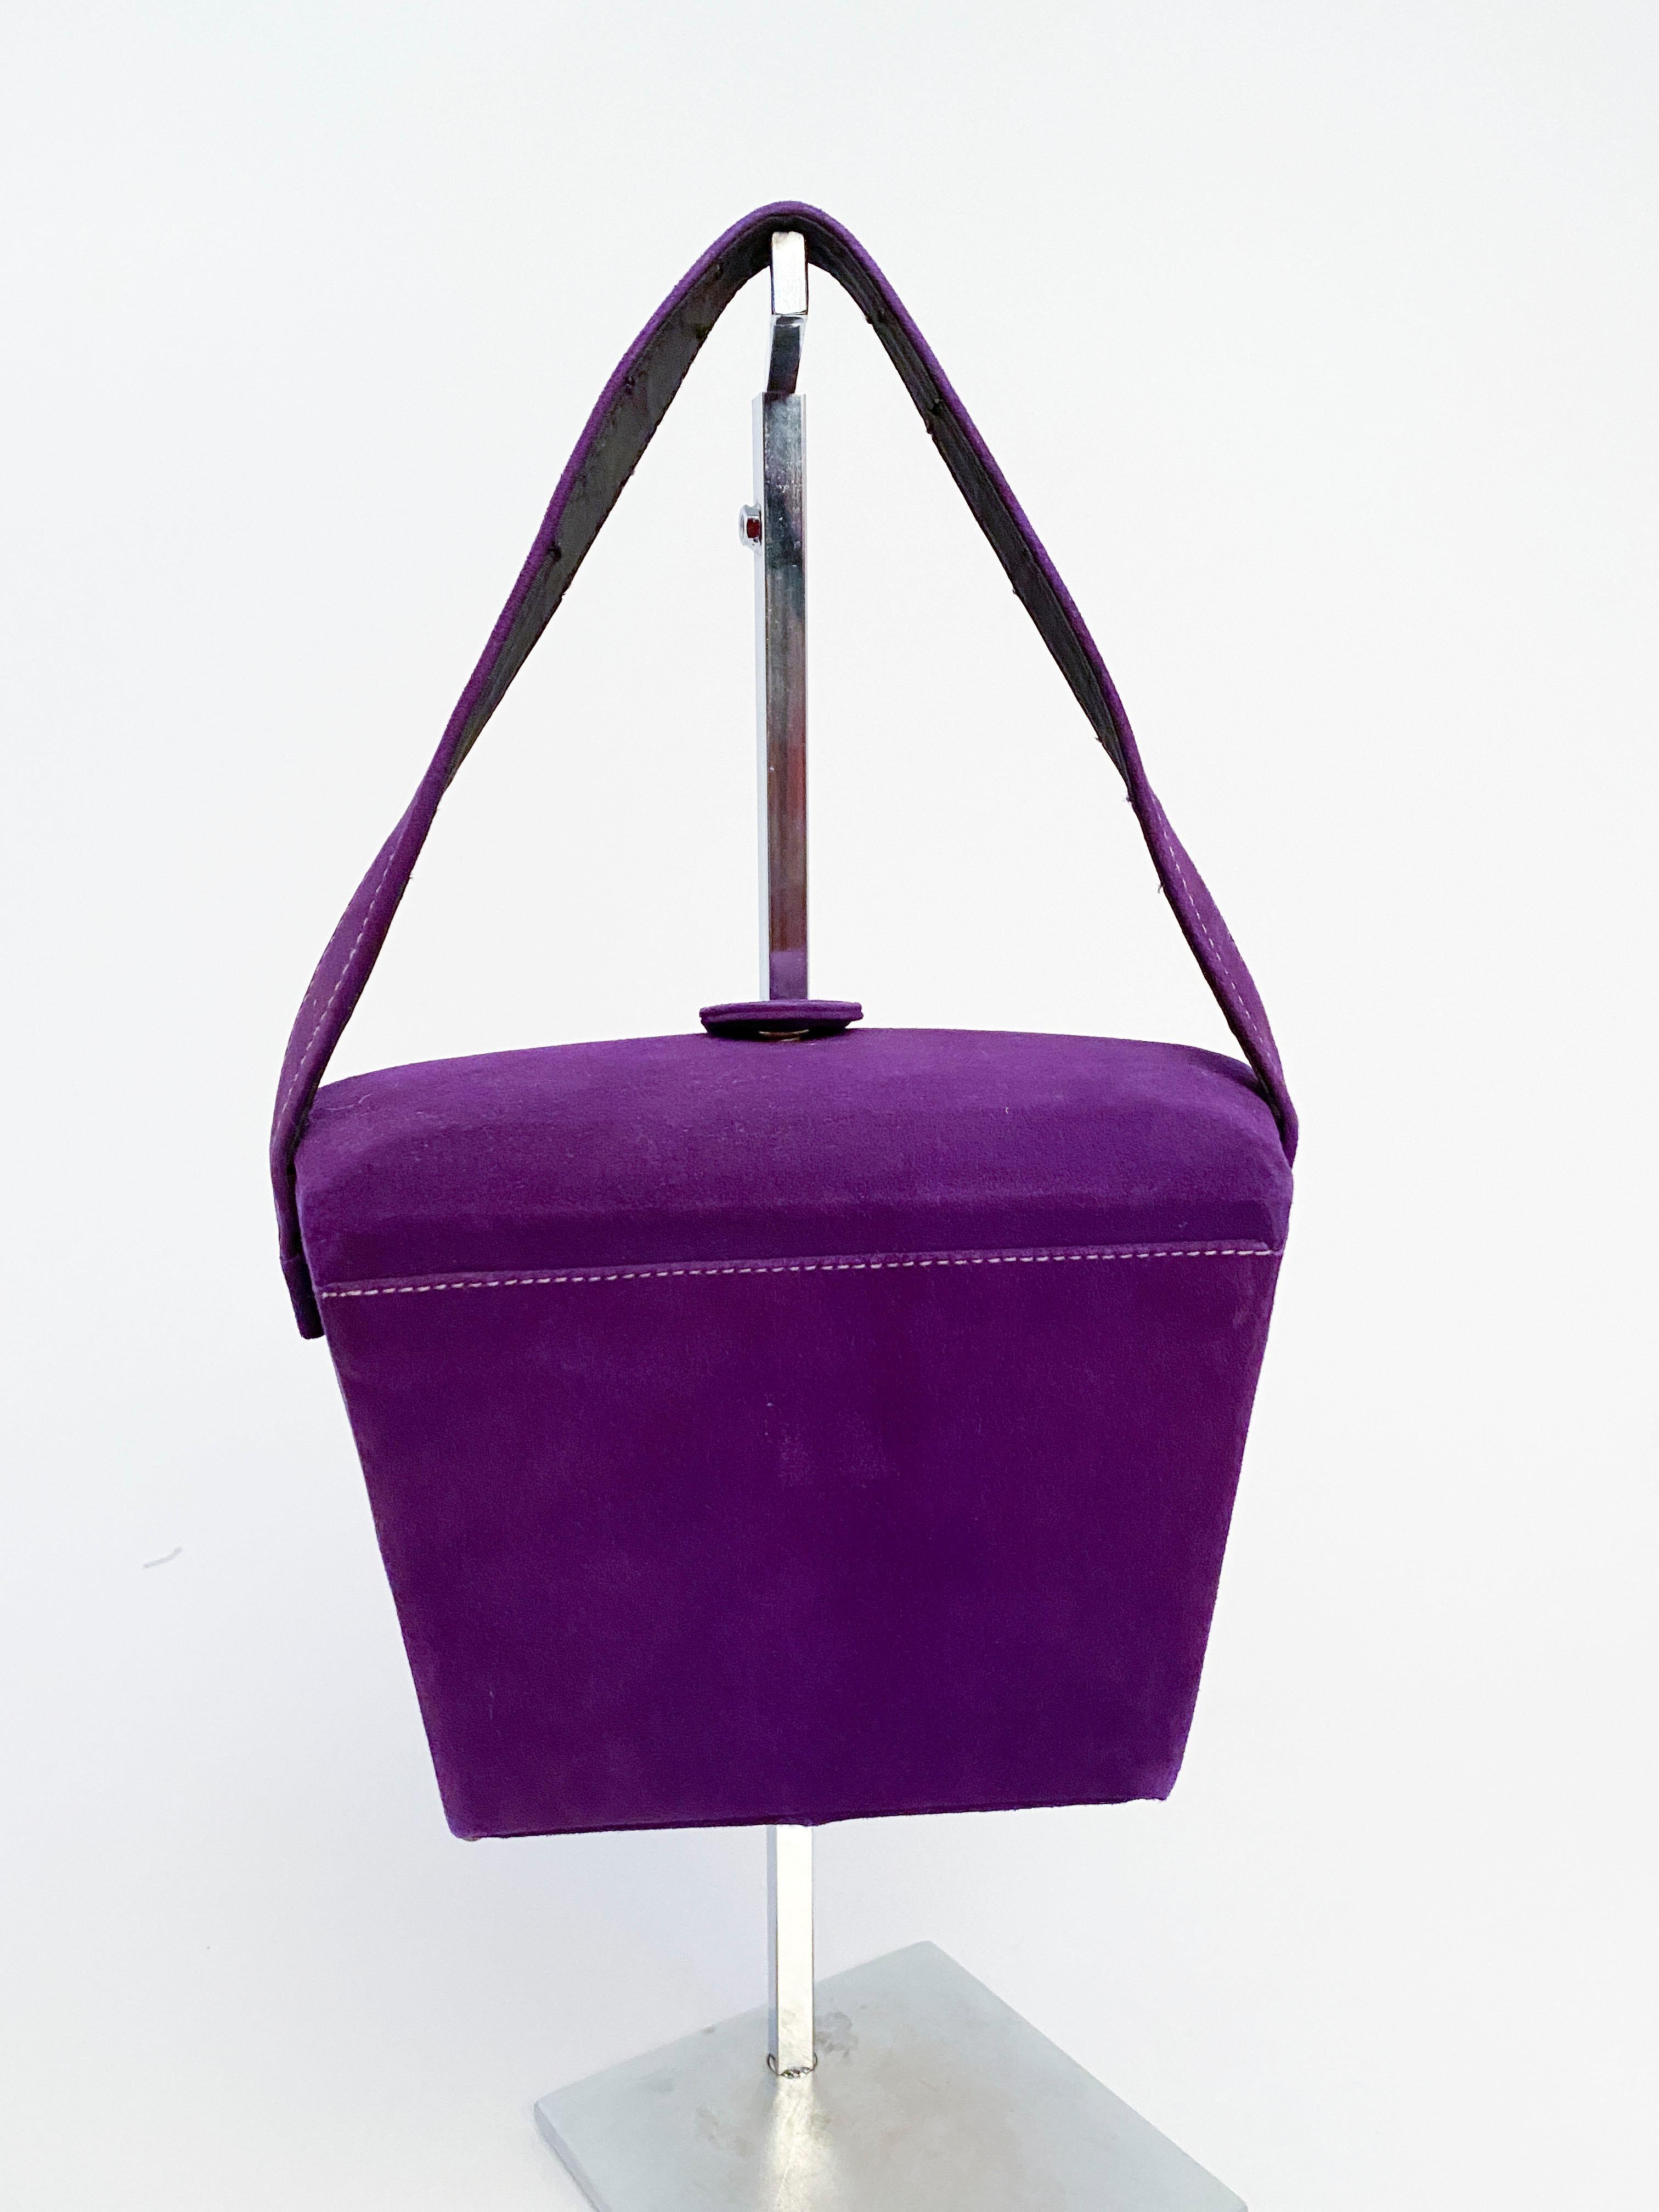 1950s French Perma-suede faux leather suede handbag in purple with snap closure, structured body, and brass feet.